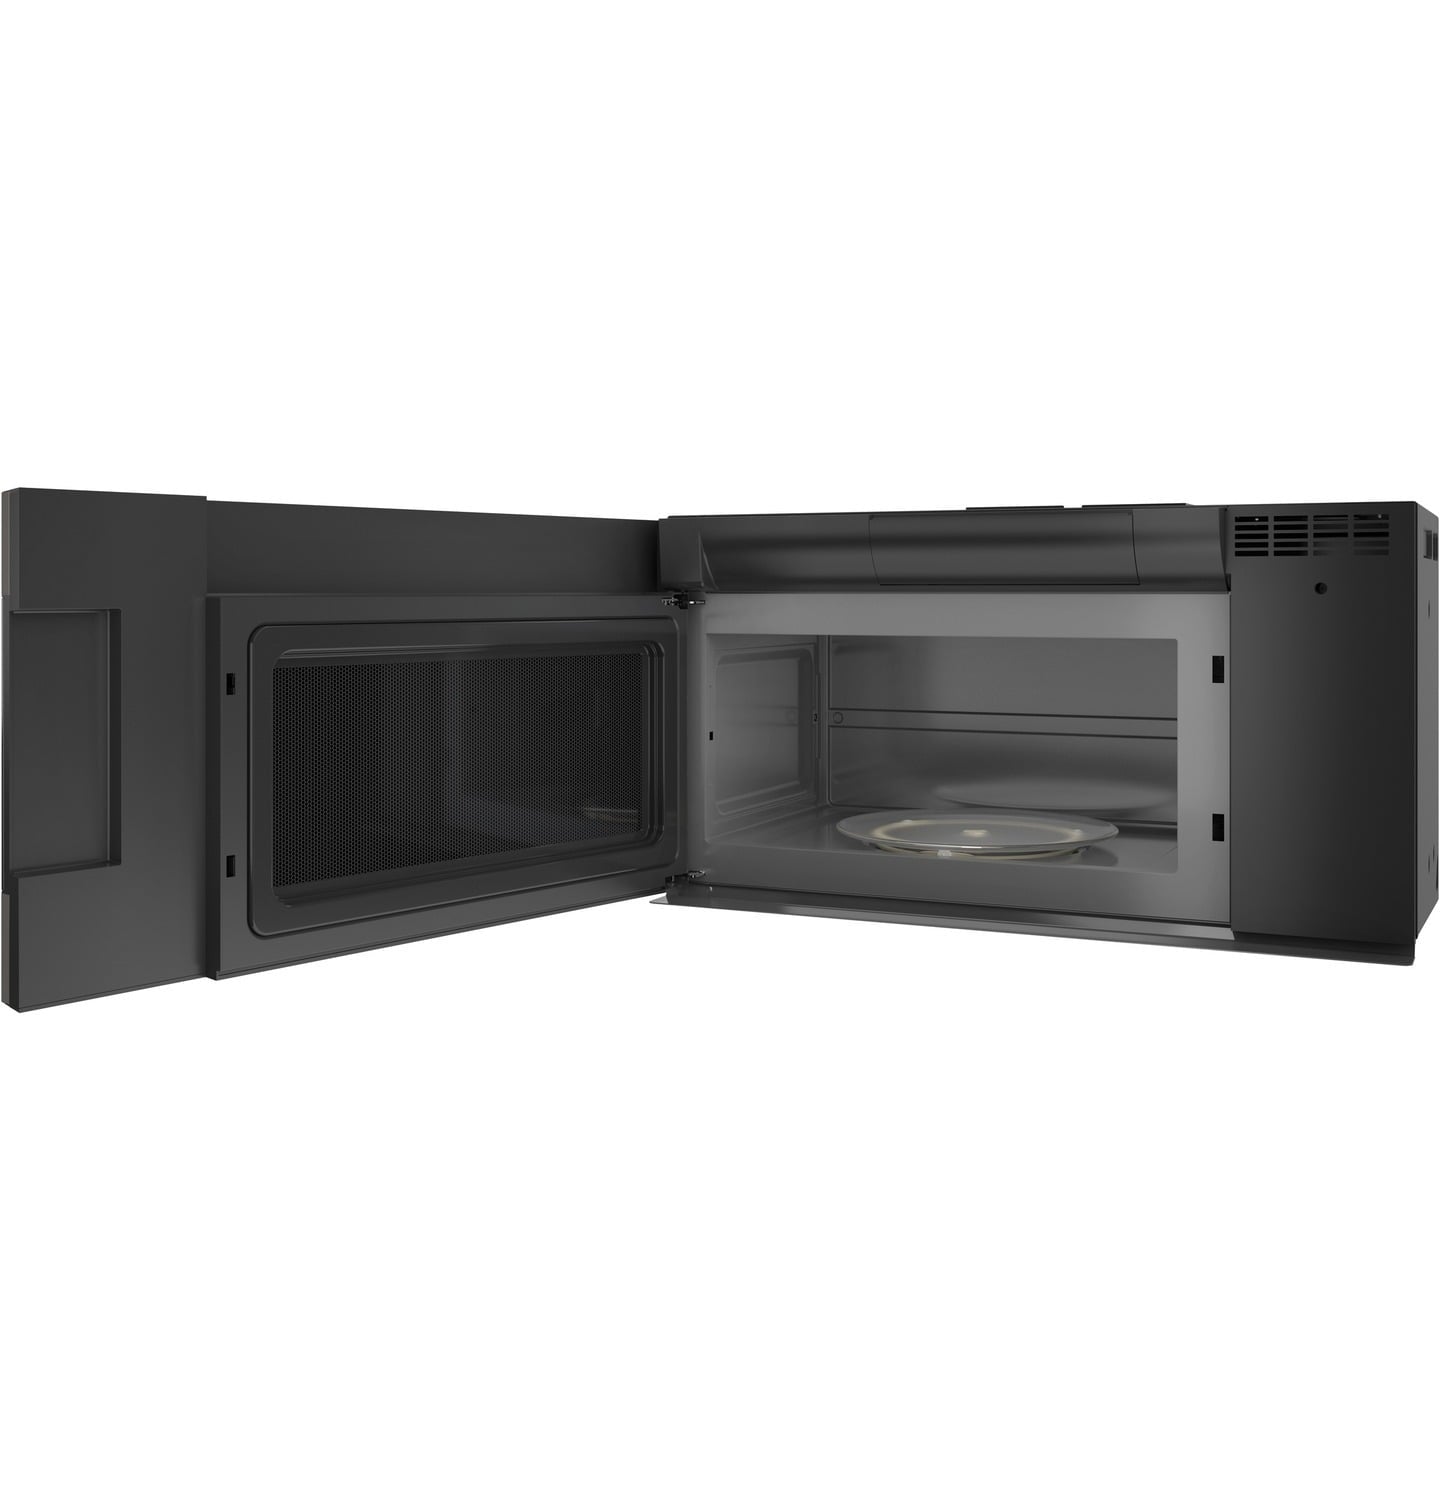 Haier QVM7167BNTS 30" 1.6 Cu. Ft. Smart Over-The-Range Microwave Oven